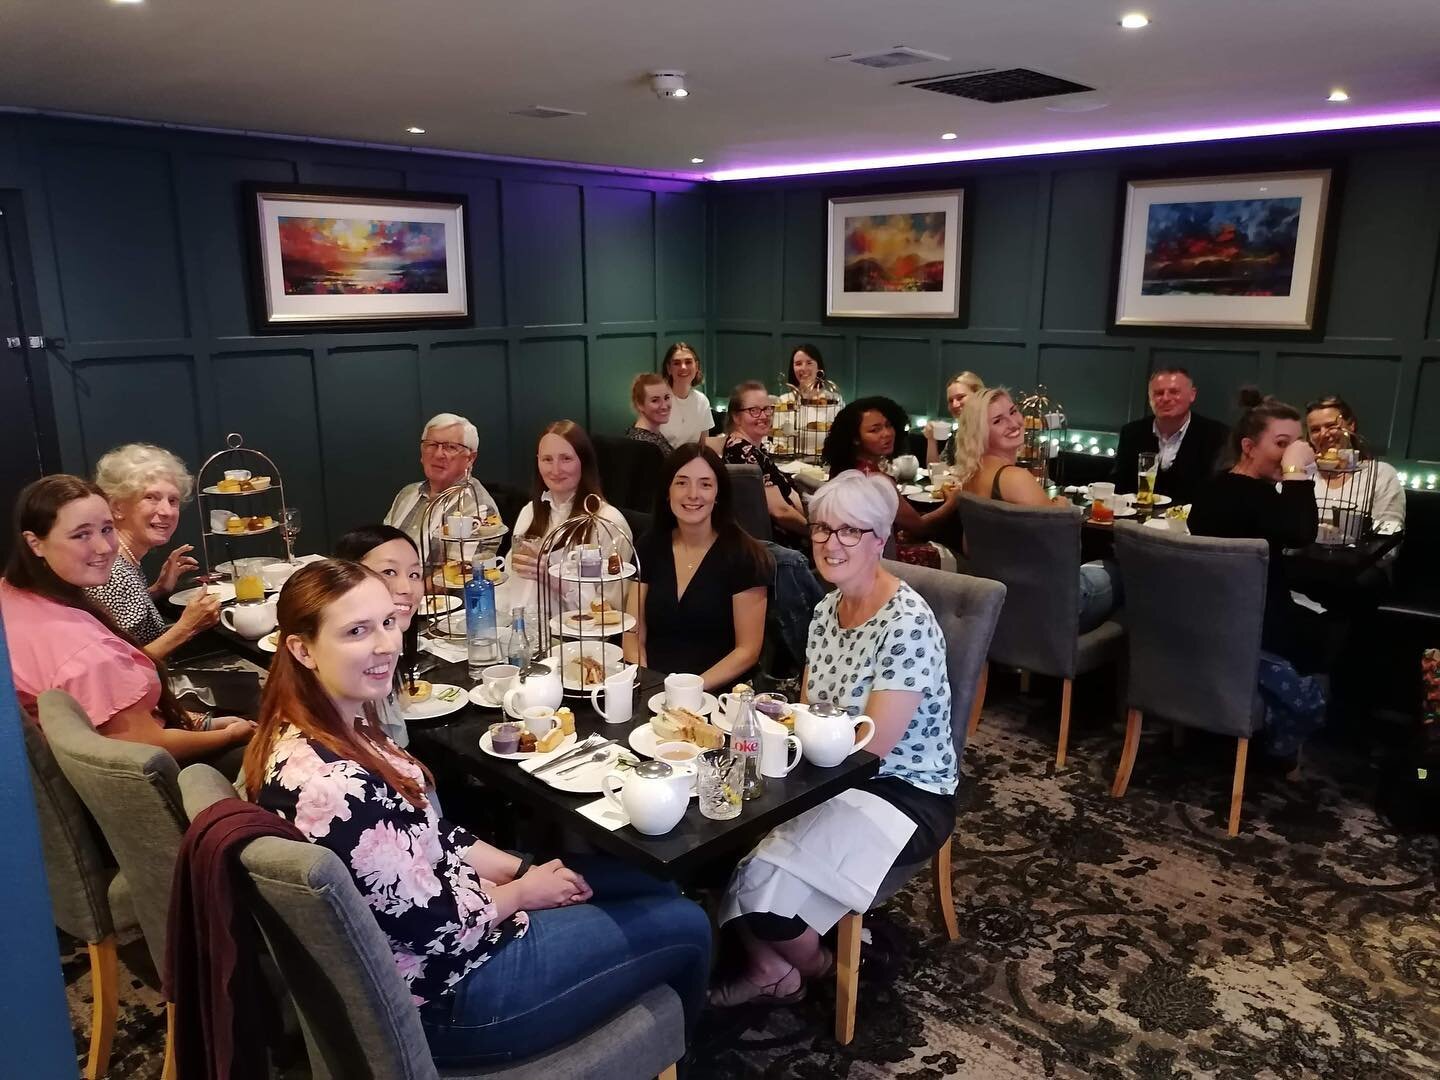 Many of our adult skaters came together for a lovely afternoon tea yesterday! Everyone had a great time getting to know each other a little better and sharing our favourite skating memories. ✨

#synchro #starlightsynchro #synchronizedskating #afterno